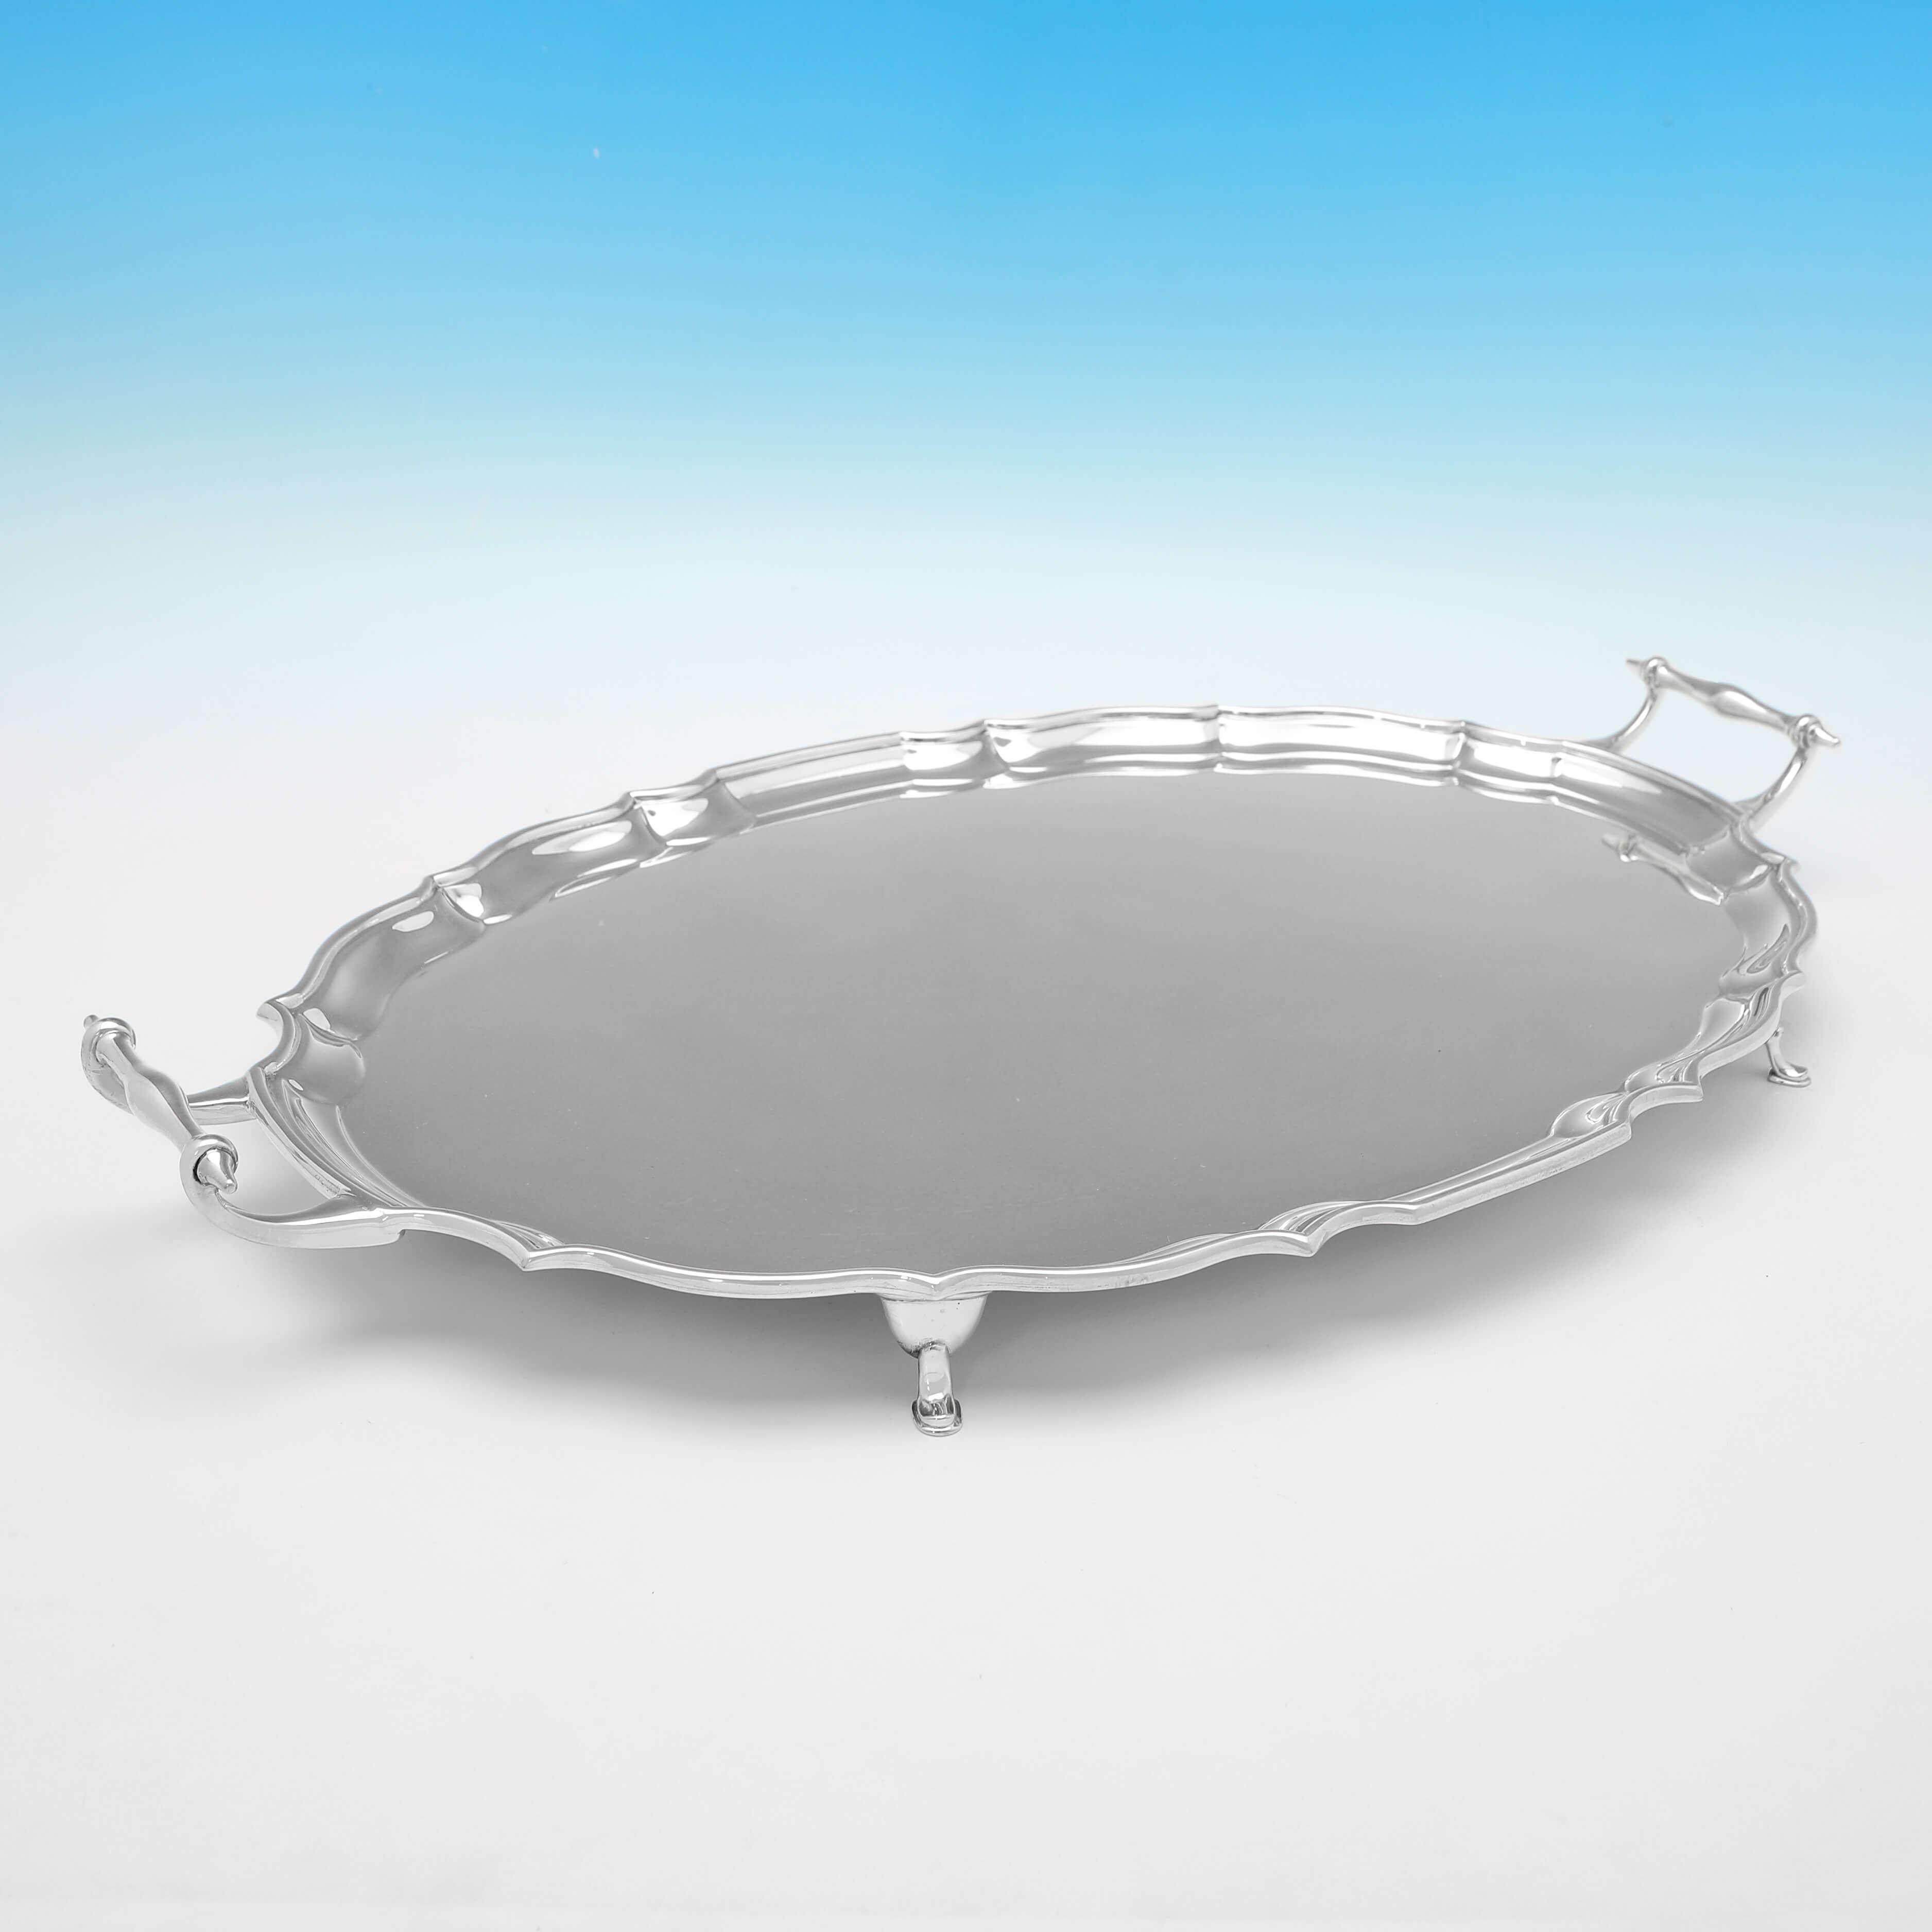 Hallmarked in Chester in 1911 by Barker Brothers Ltd., this handsome, Antique Sterling Silver Tray, features a shaped border, and stands on four feet. 

The tray measures 2.5